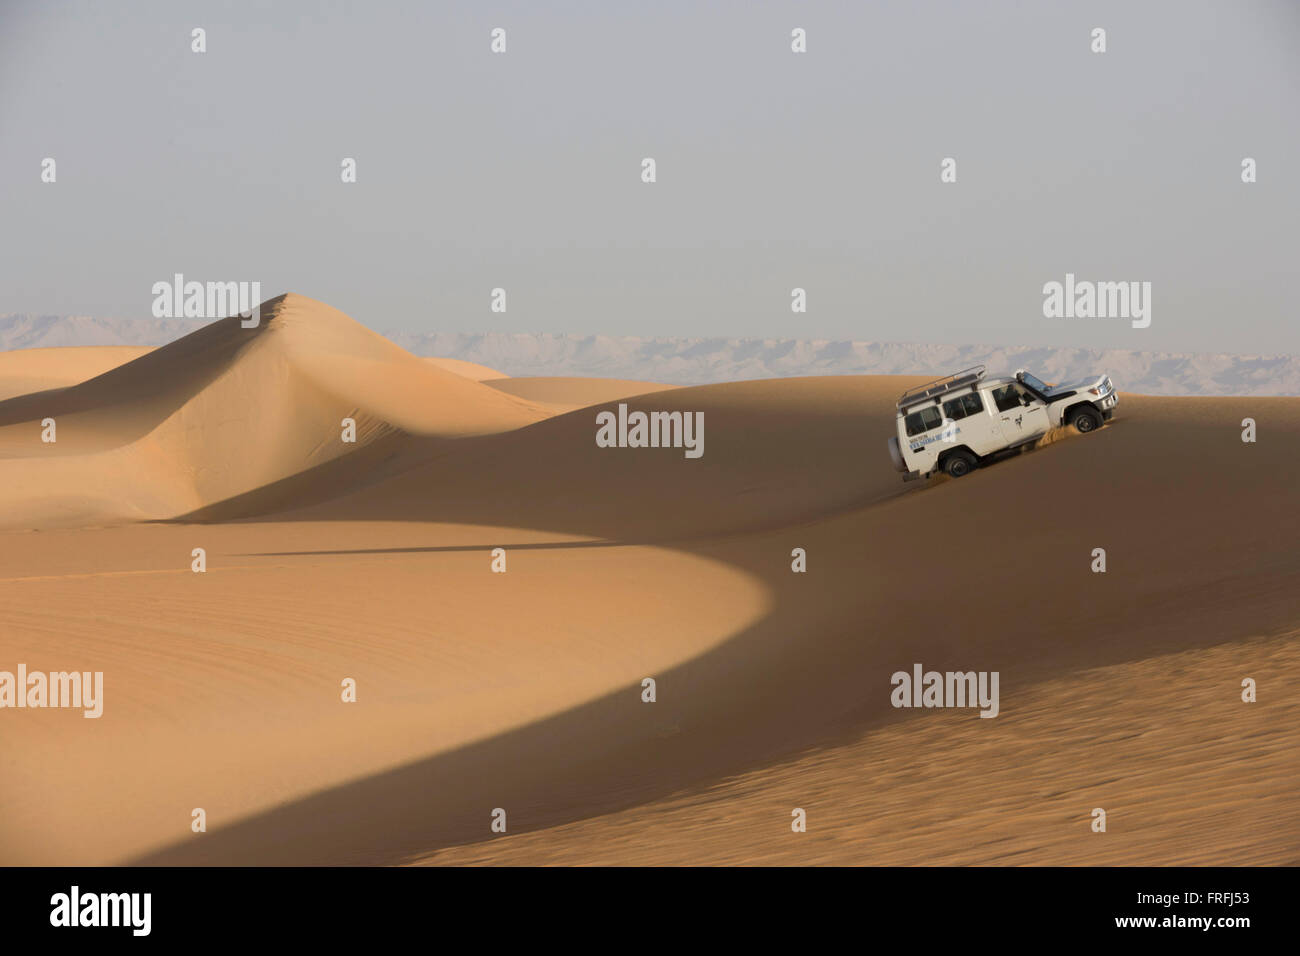 A 4x4 desert expedition vehicle climbs a sand dune at al-Galamun, near Dahkla Oasis, Western Desert, Egypt. The Western Desert covers an area of some 700,000 km2, thereby accounting for around two-thirds of Egypt's total land area. Dakhla Oasis is one of the seven oases of Egypt's Western Desert (part of the Libyan Desert). It lies in the New Valley Governorate, 350 km (220 mi.) and measures approximately 80 km (50 mi) from east to west and 25 km (16 mi) from north to south. Stock Photo